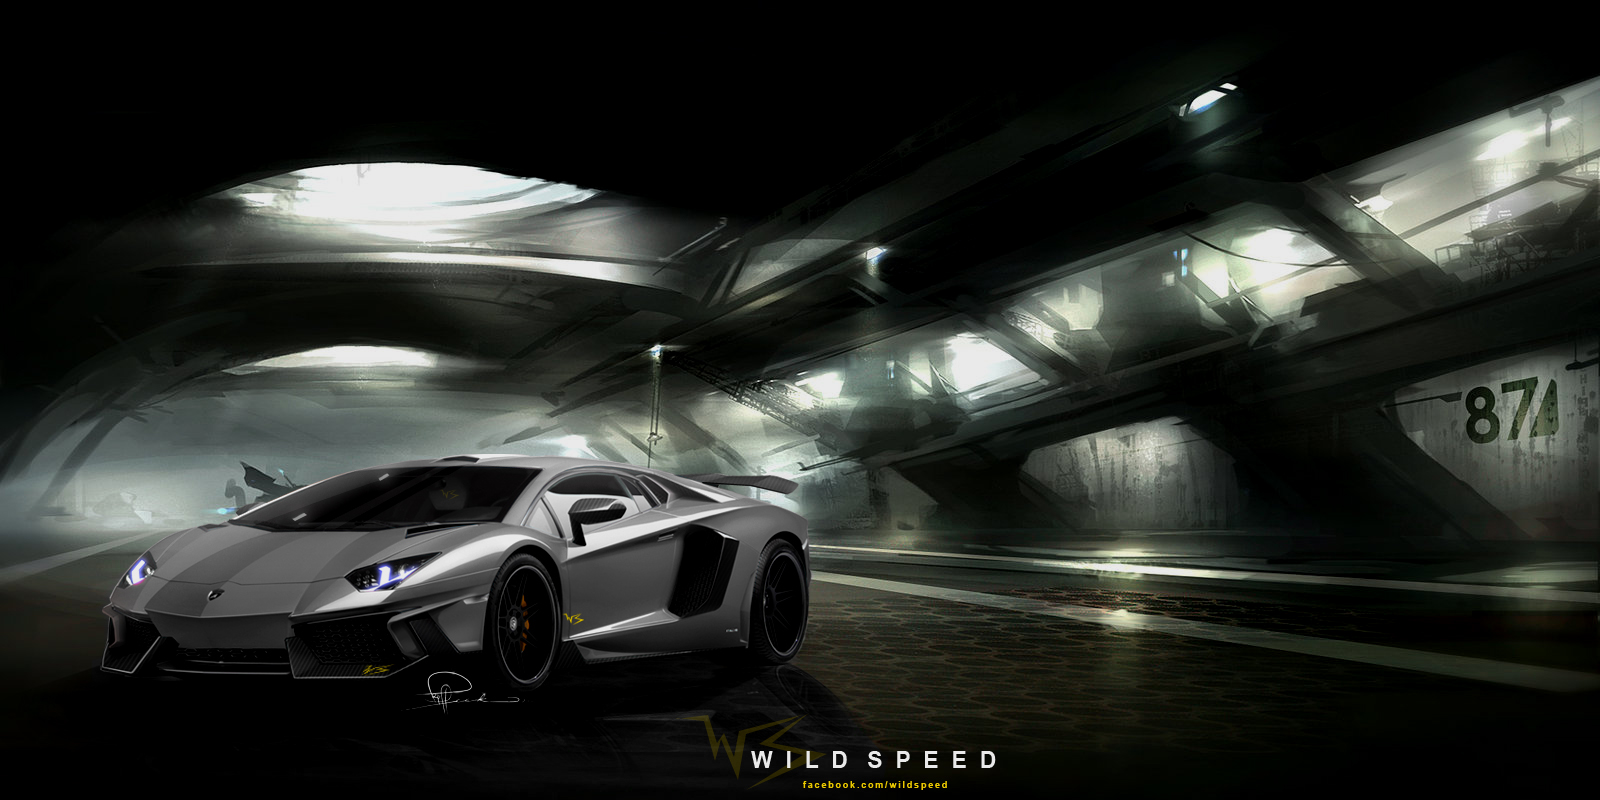 Lamborghini Aventador Wallpapers HD A33 White - lamborghini aventador desktop sports cars, race cars, luxury cars, expensive cars, wallpapers pictures images free download